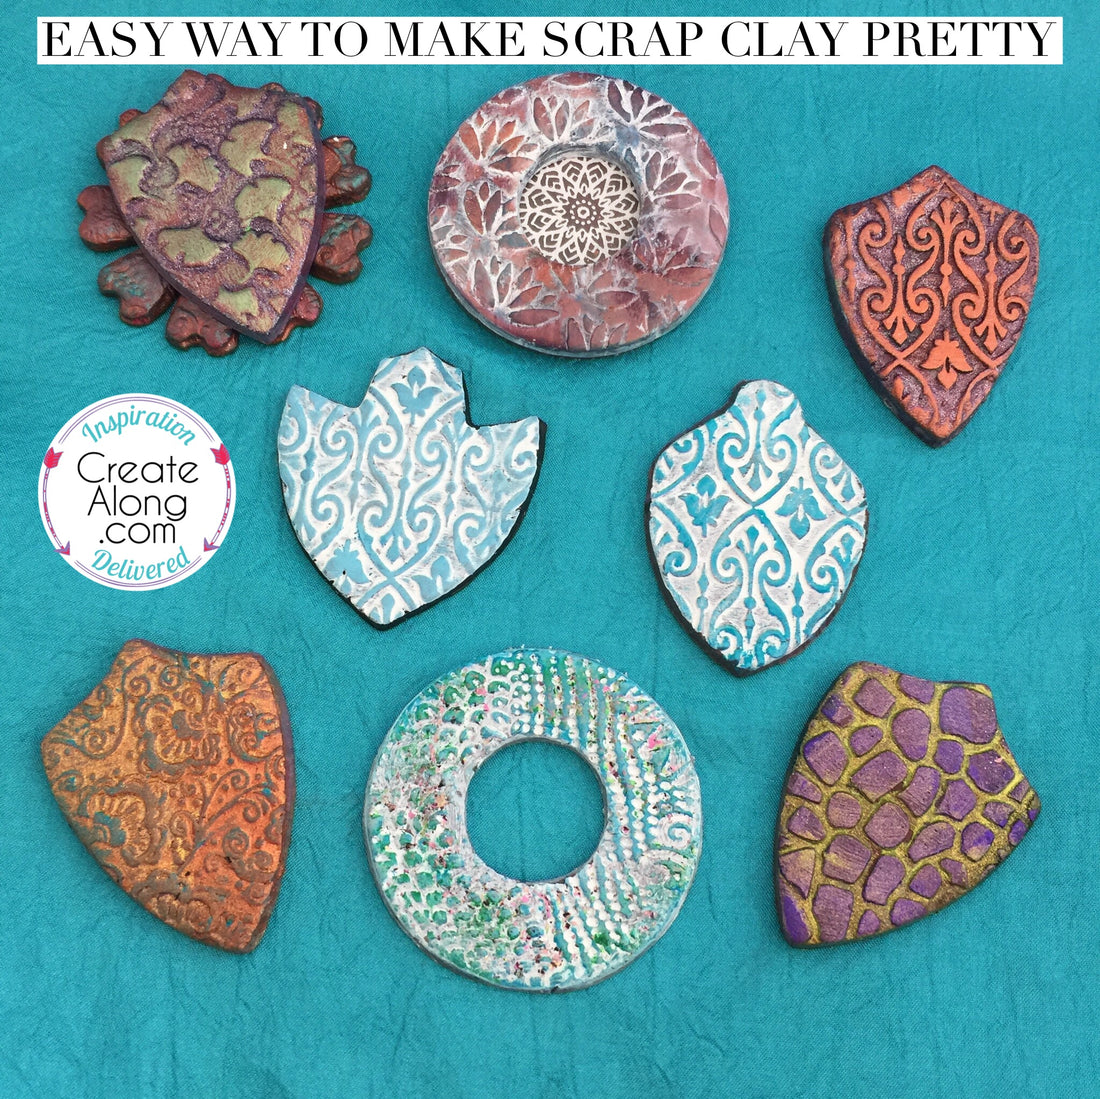 Making Scrap Polymer Clay Beautiful with Ease